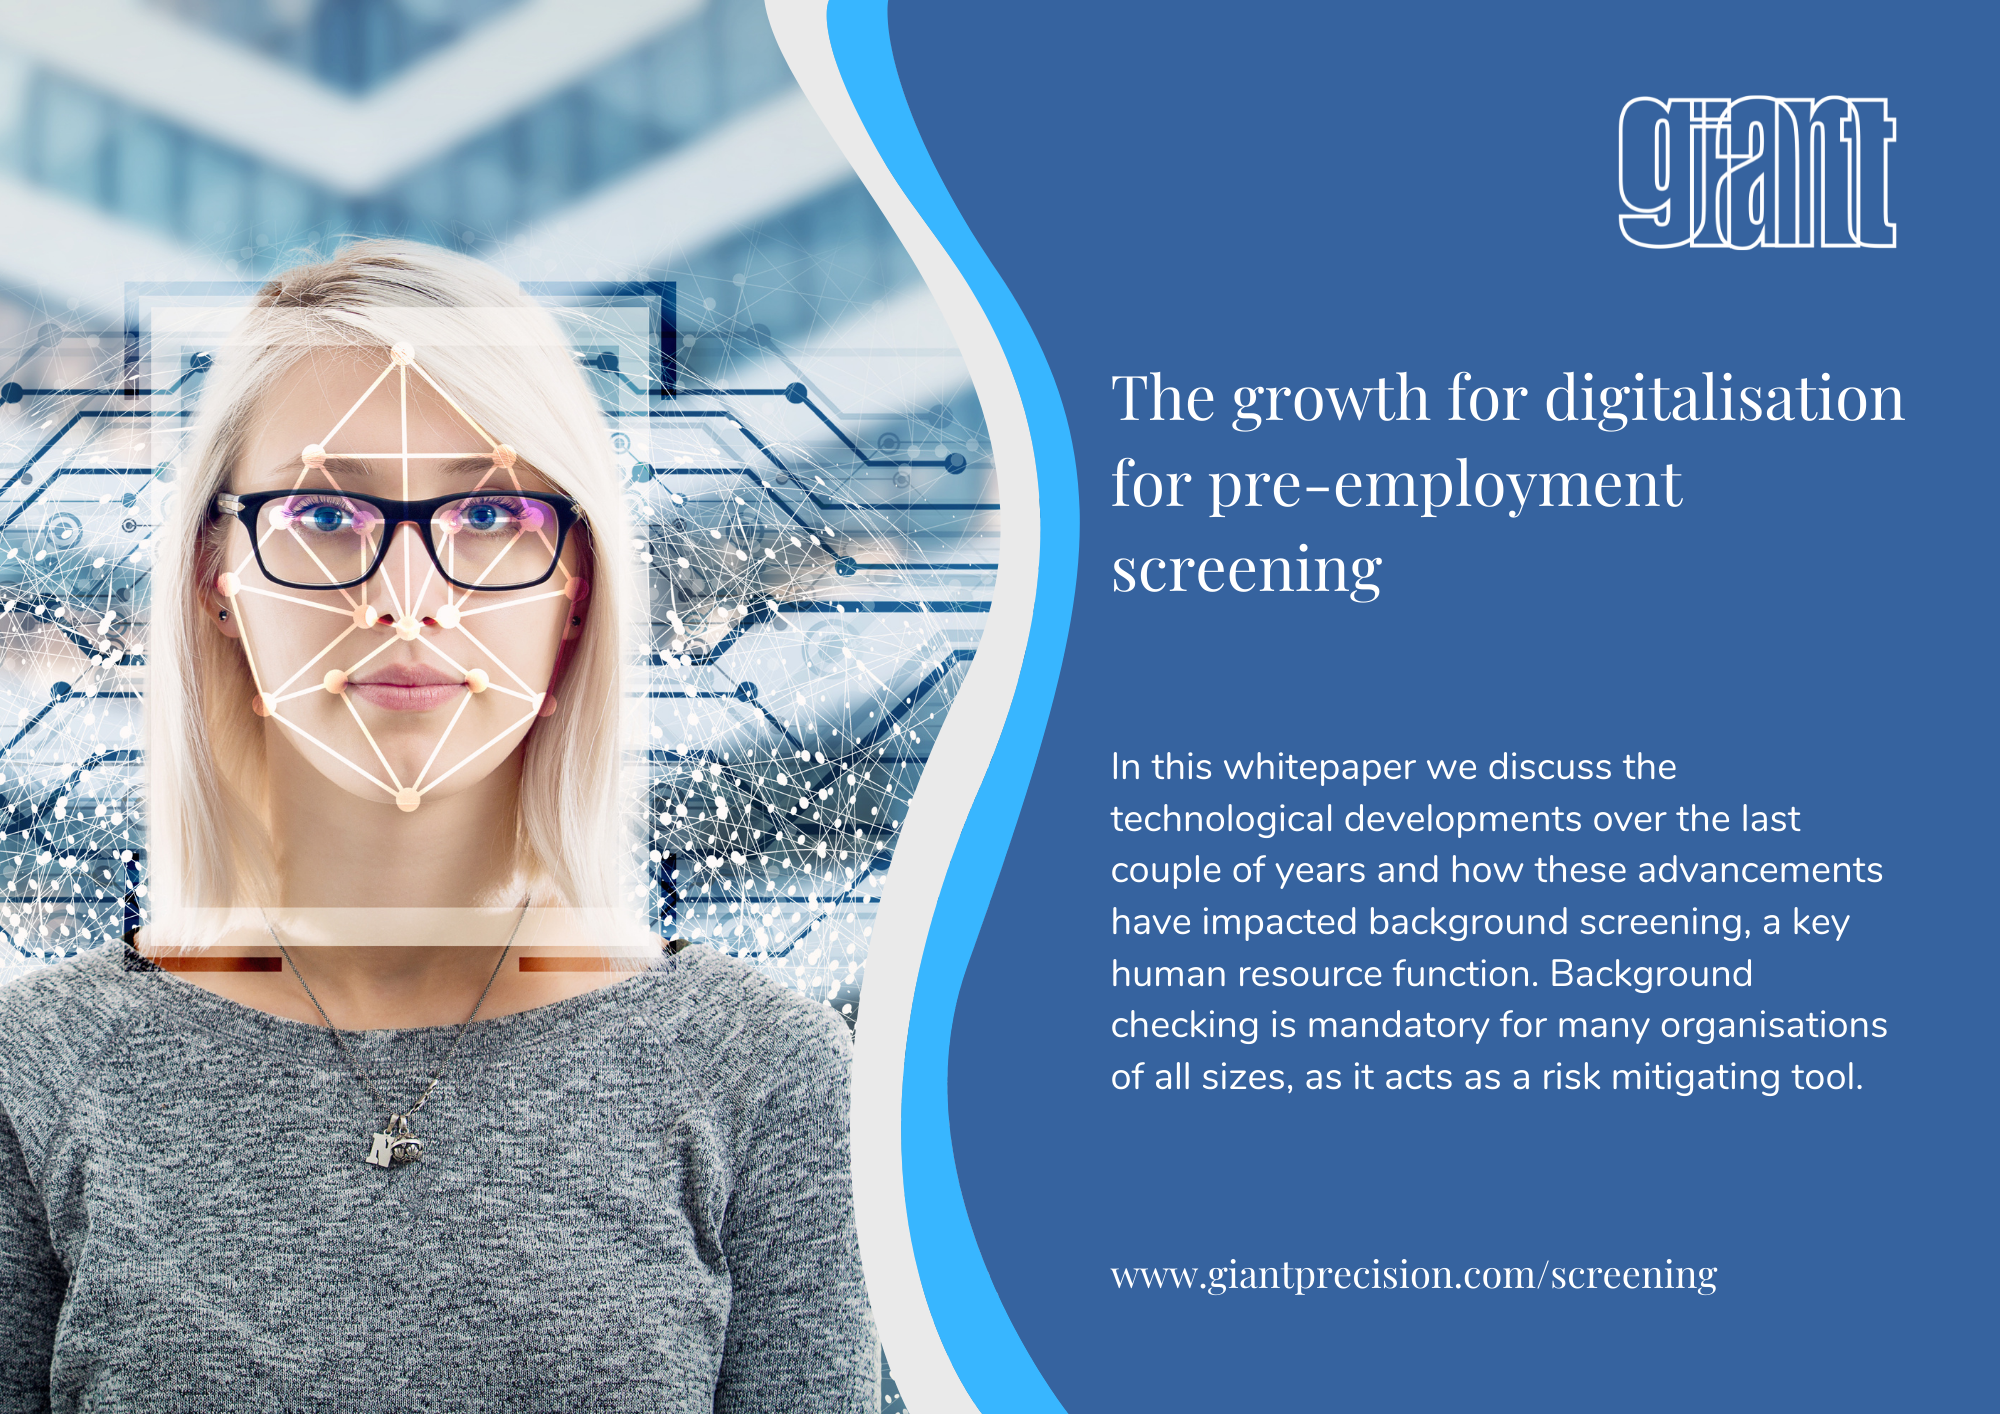 The growth for digitalisation for pre-employment screening